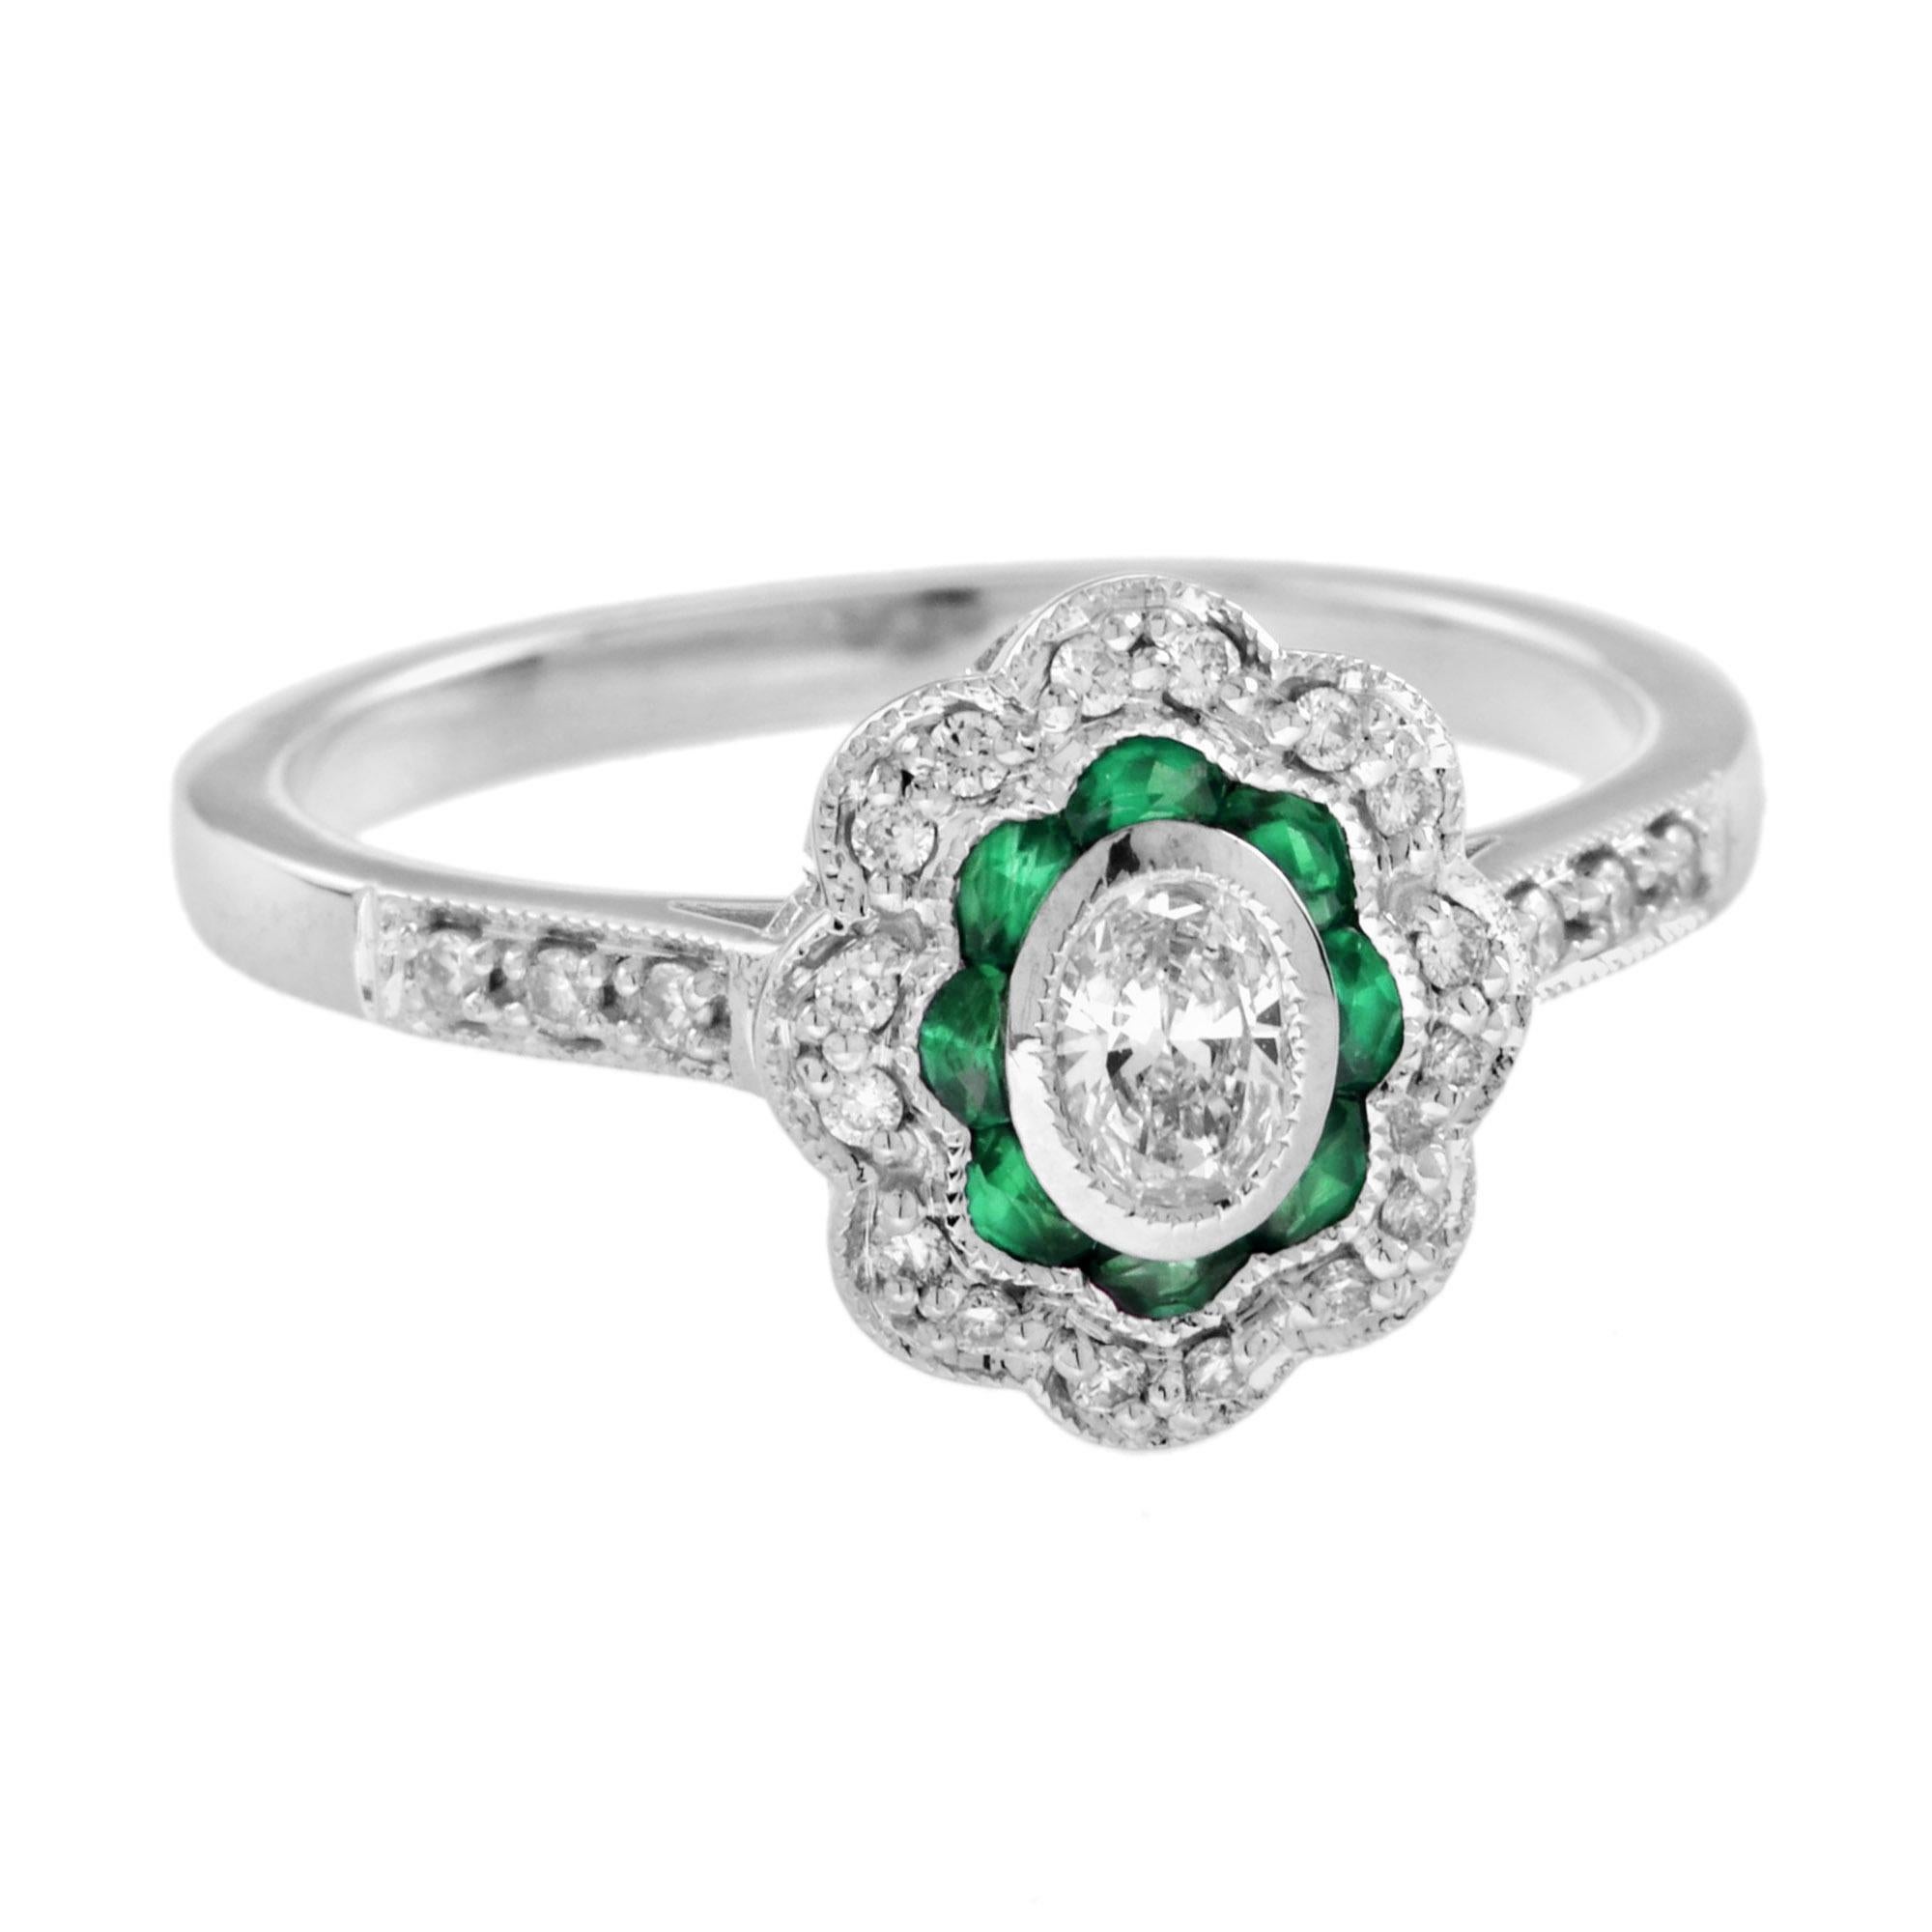 Oval Cut 0.15 Ct. Diamond and Emerald Art Deco Style Engagement Ring in 18K White Gold For Sale